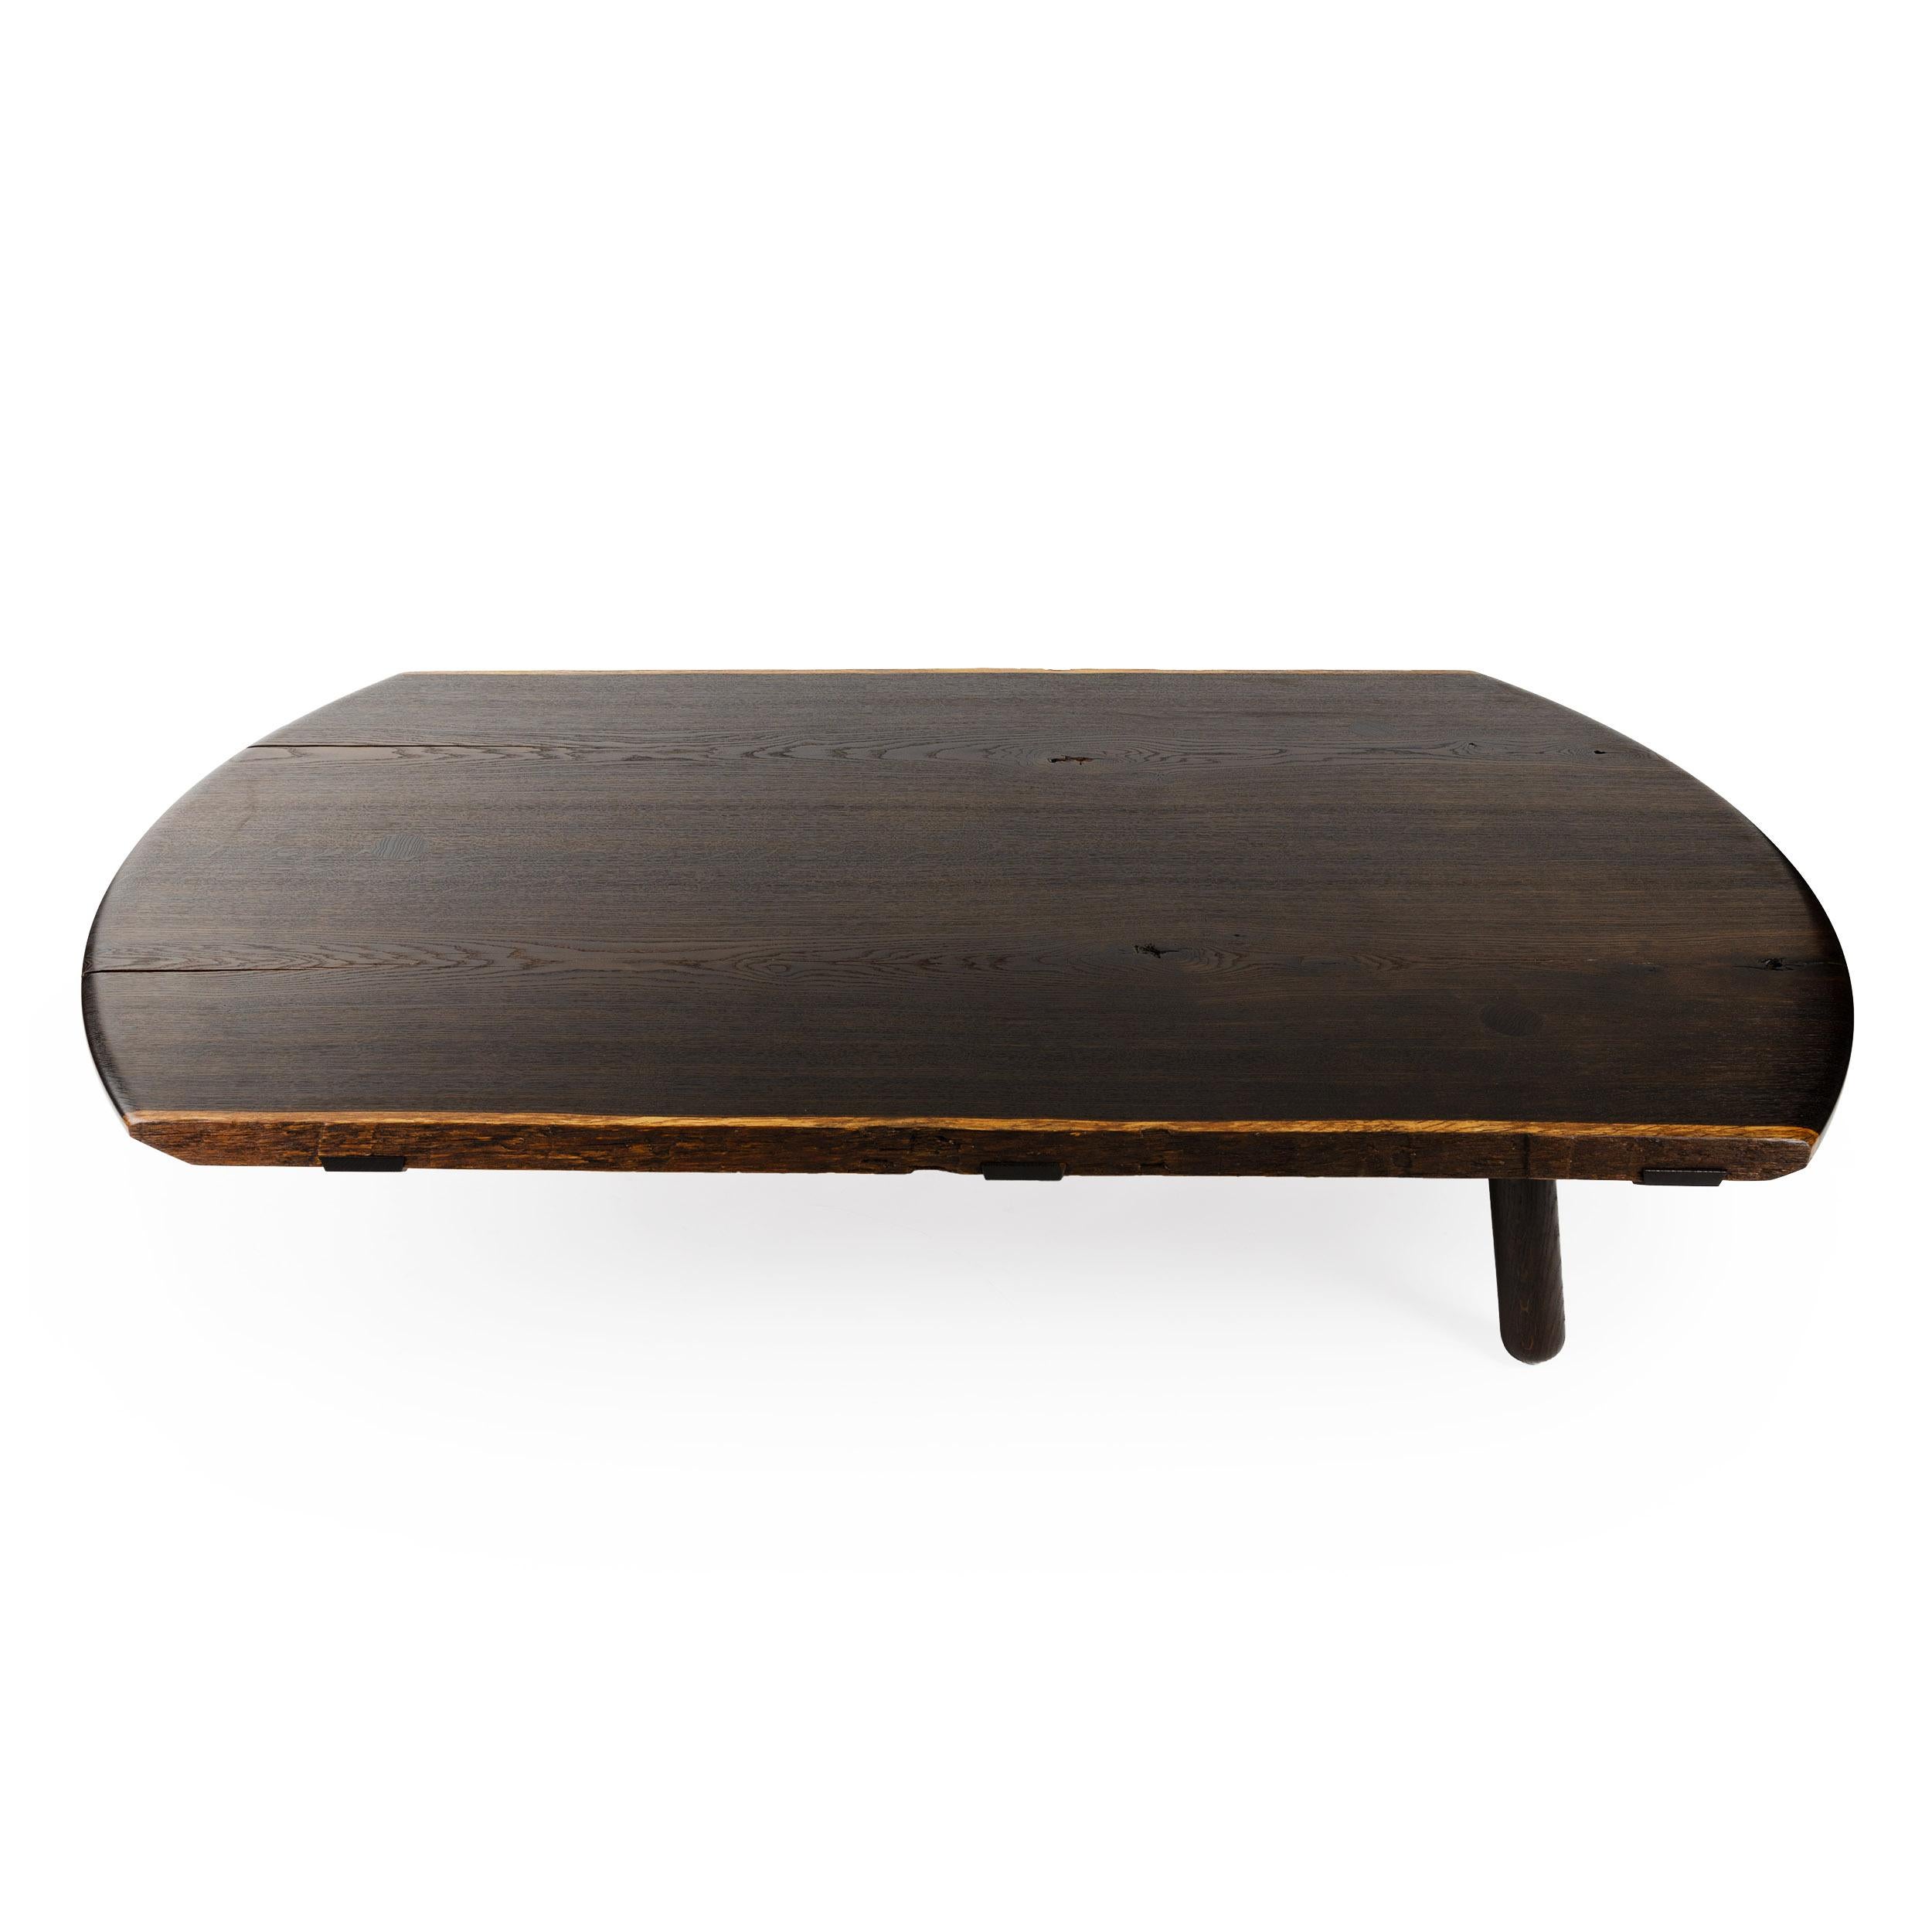 Al low cocktail / coffee table handcrafted in fumed oak with a rounded ends. Table features natural edges when innate in the wood and substantial turned legs that are mortised through the top. The top consists of live edges, and solid boards joined